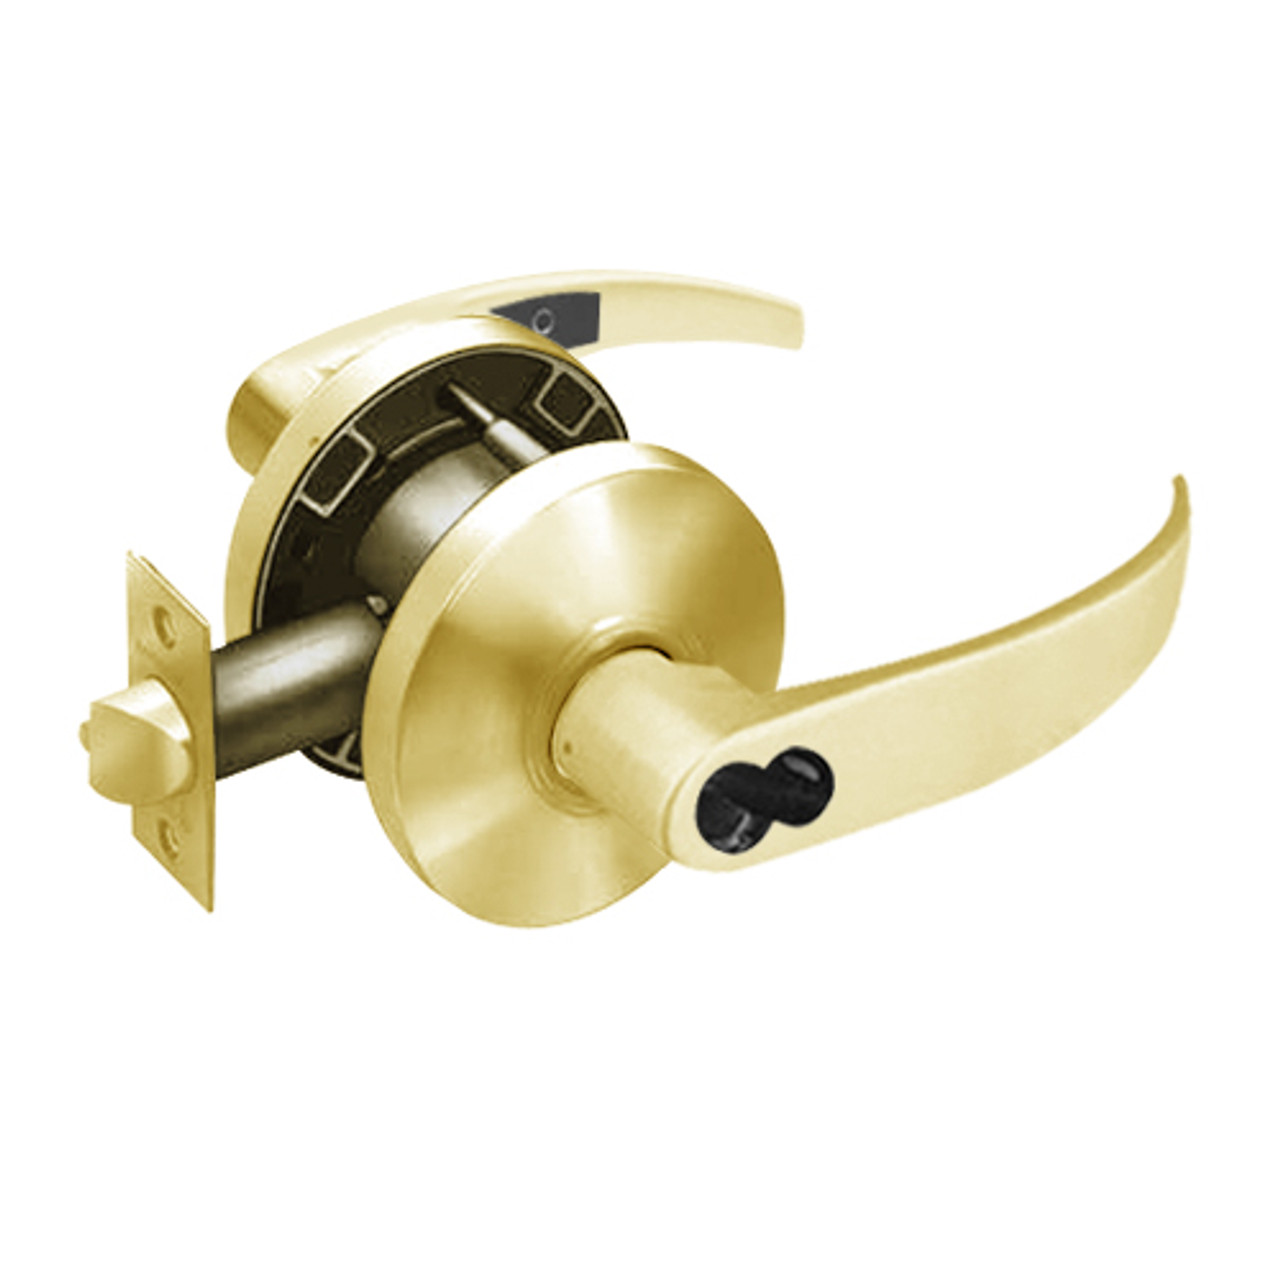 2860-65G04-KP-03 Sargent 6500 Series Cylindrical Storeroom/Closet Locks with P Lever Design and K Rose Prepped for LFIC in Bright Brass